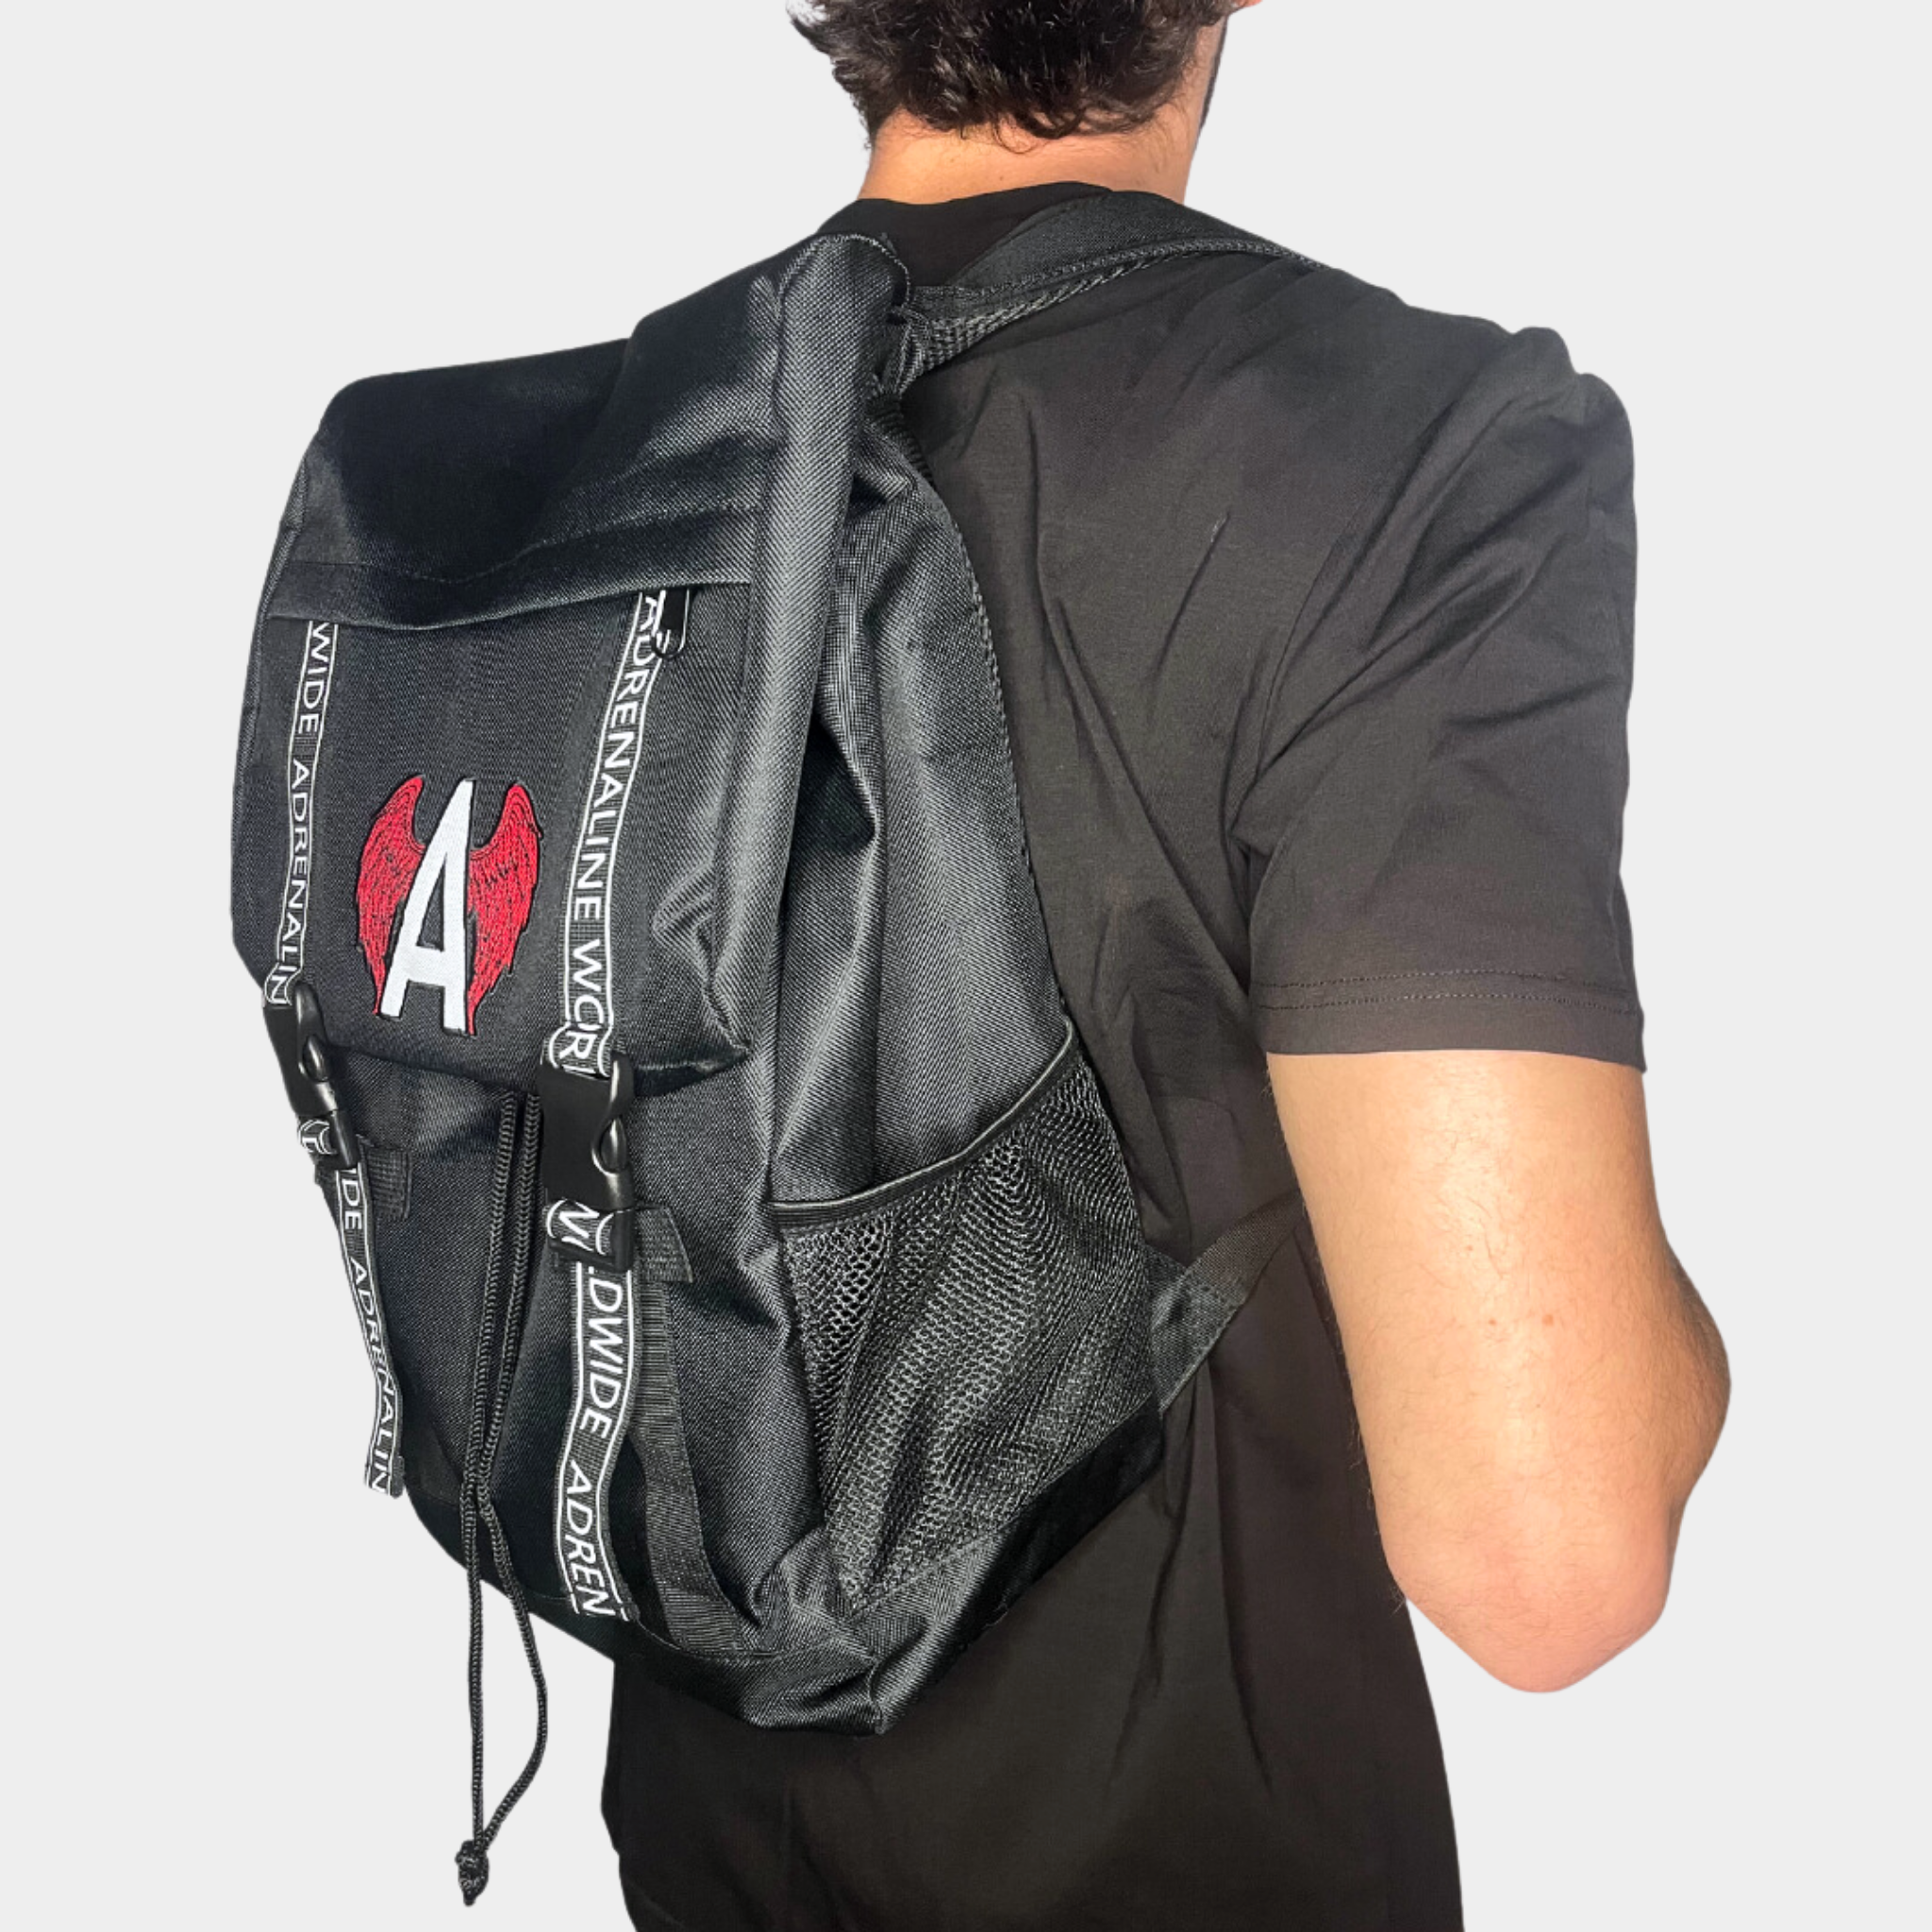 Free Pro Series Backpack